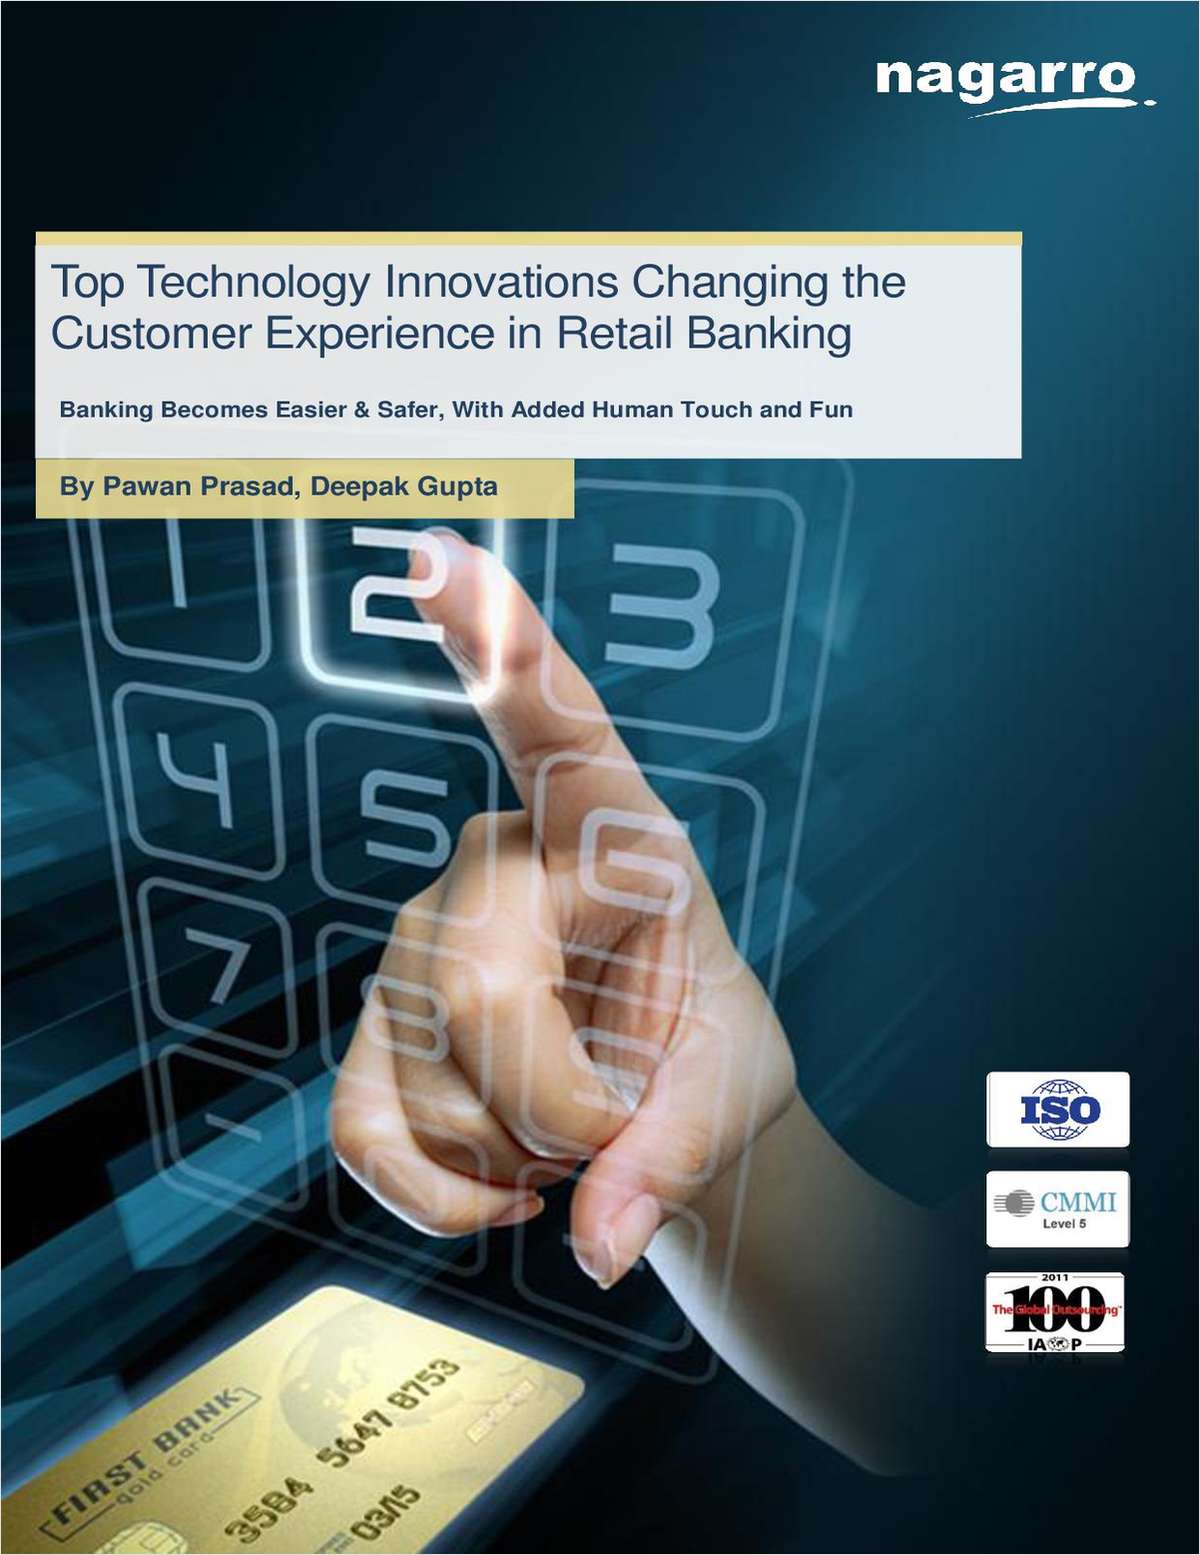 Top Technology Innovations Changing the Customer Experience in Retail Banking